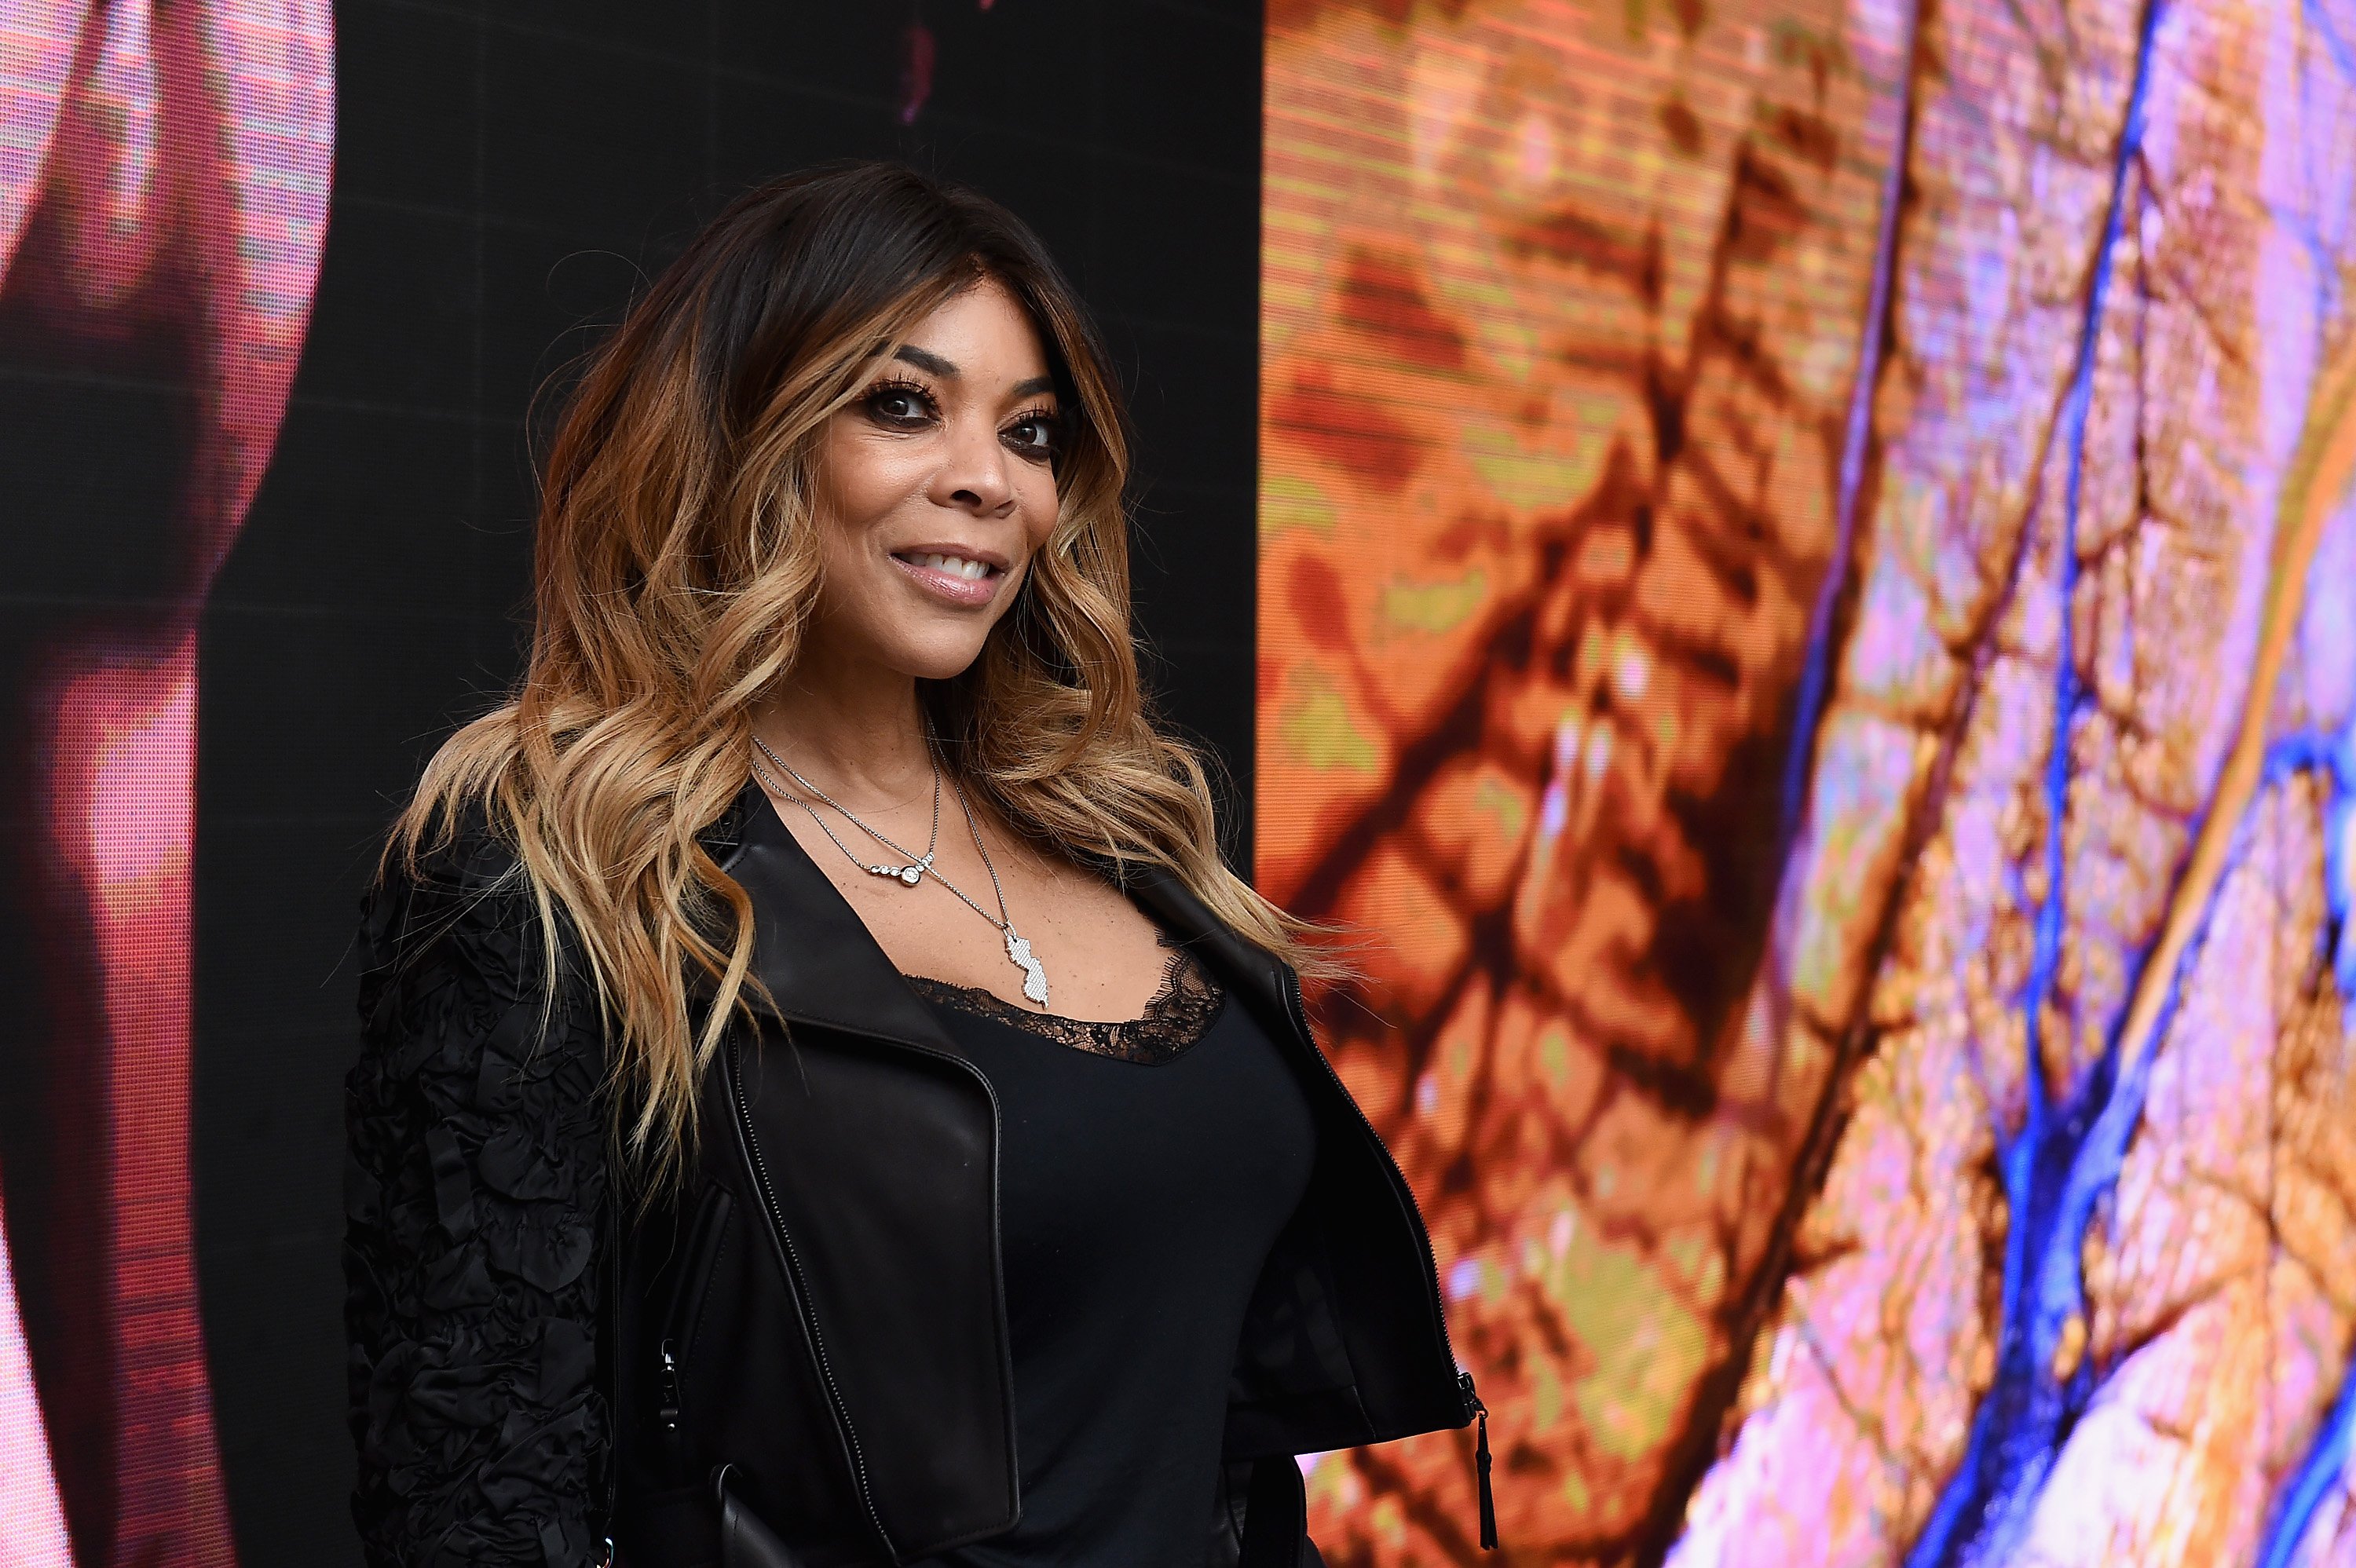 Wendy Williams smiles and wears a black outfit